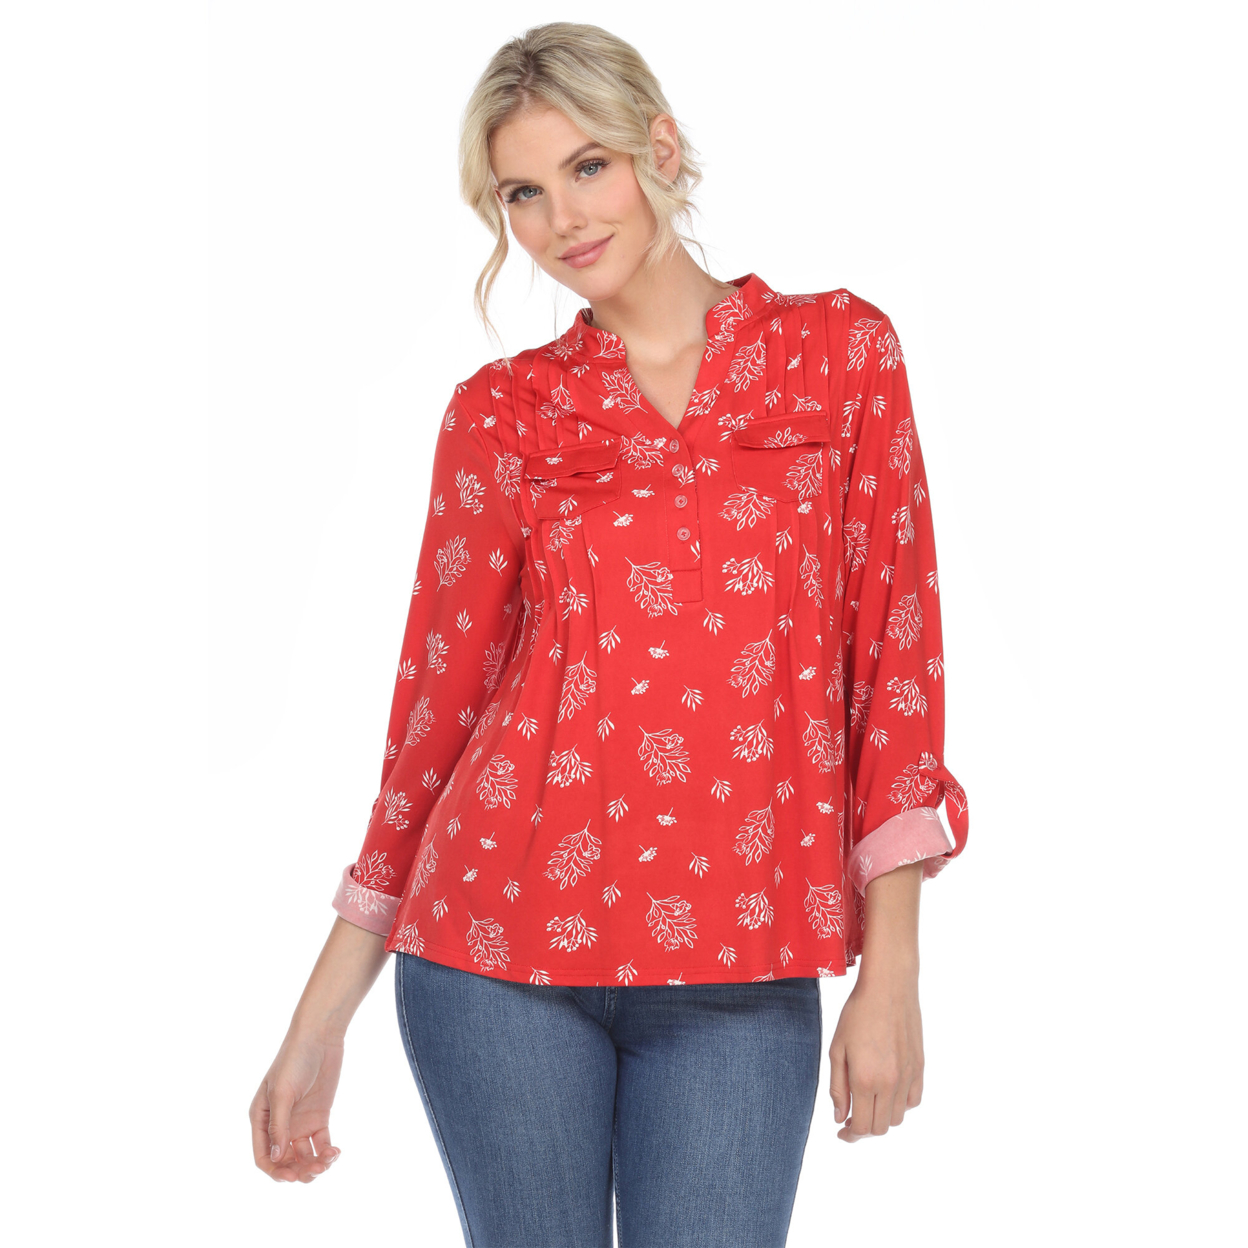 White Mark Women's Pleated Long Sleeve Leaf Print Blouse - Red, X-Large